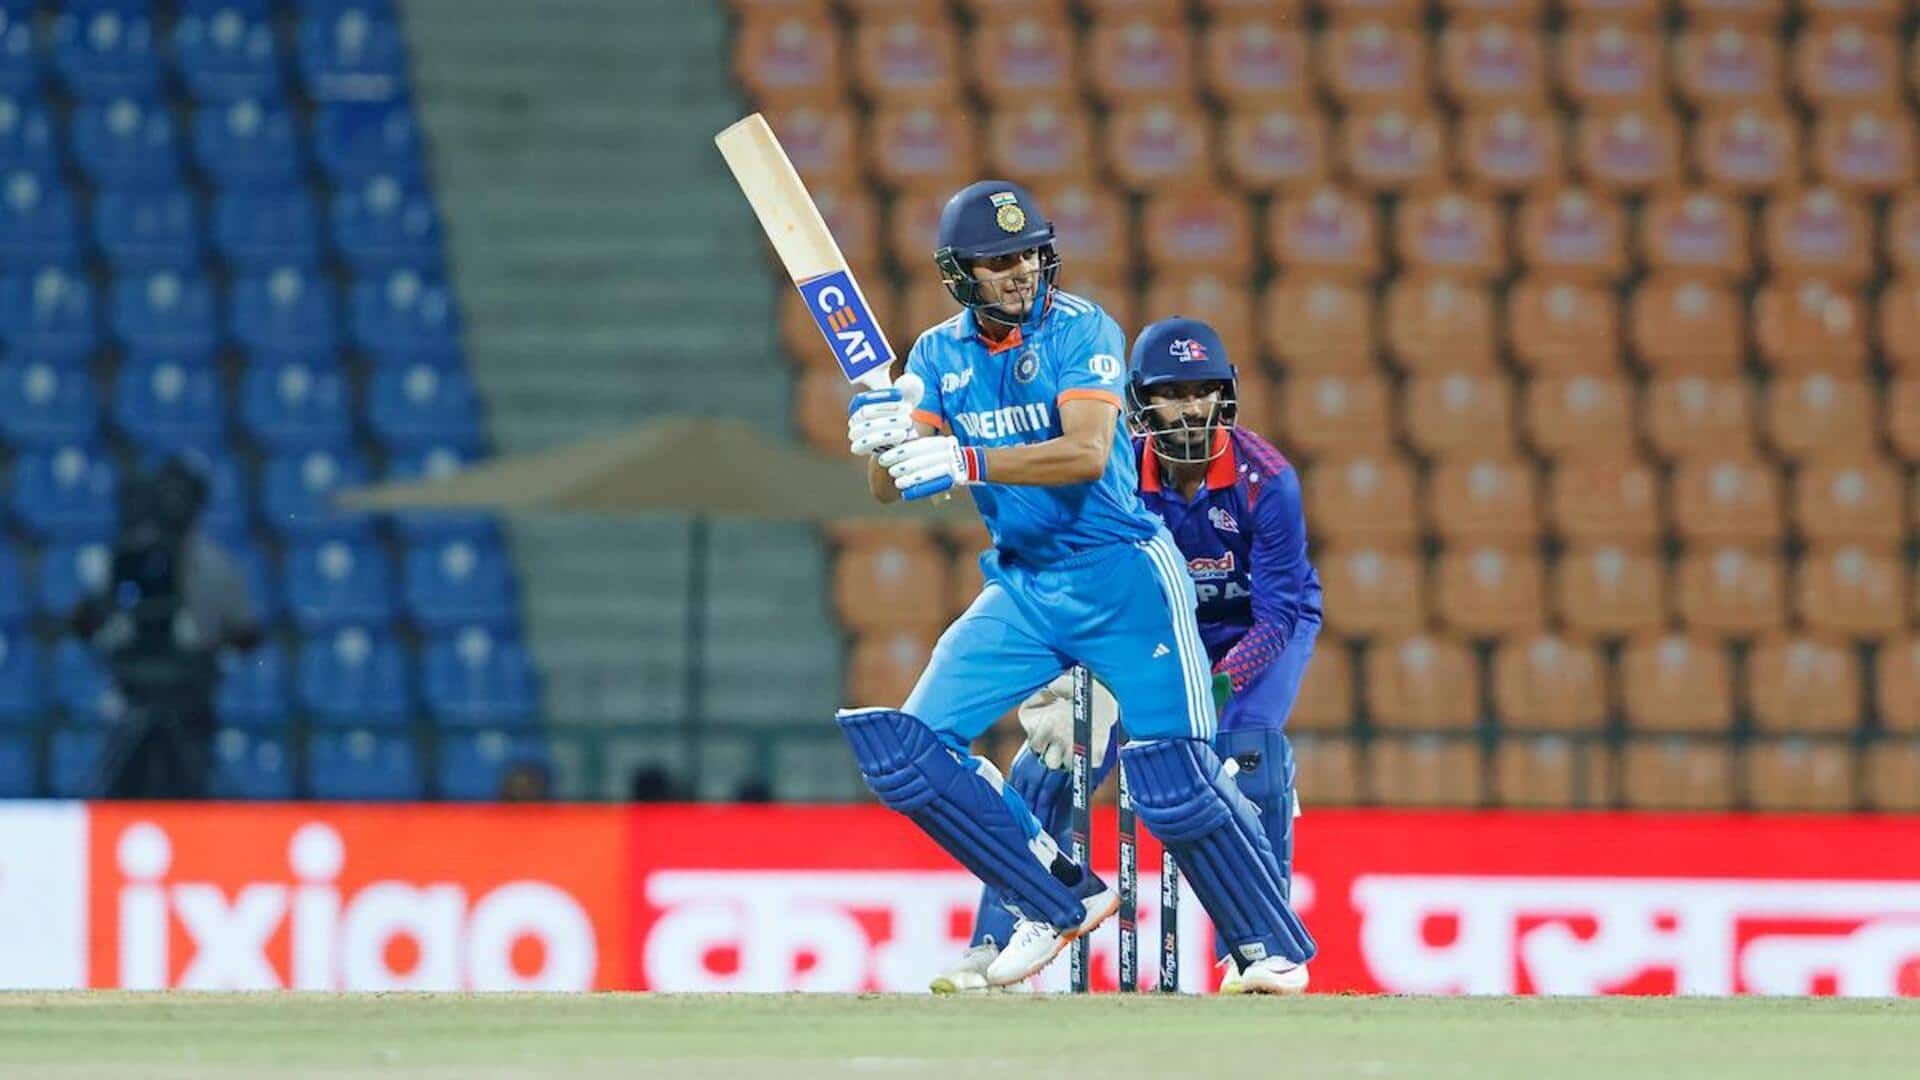 Zimbabwe vs India T20Is: Presenting the statistical preview